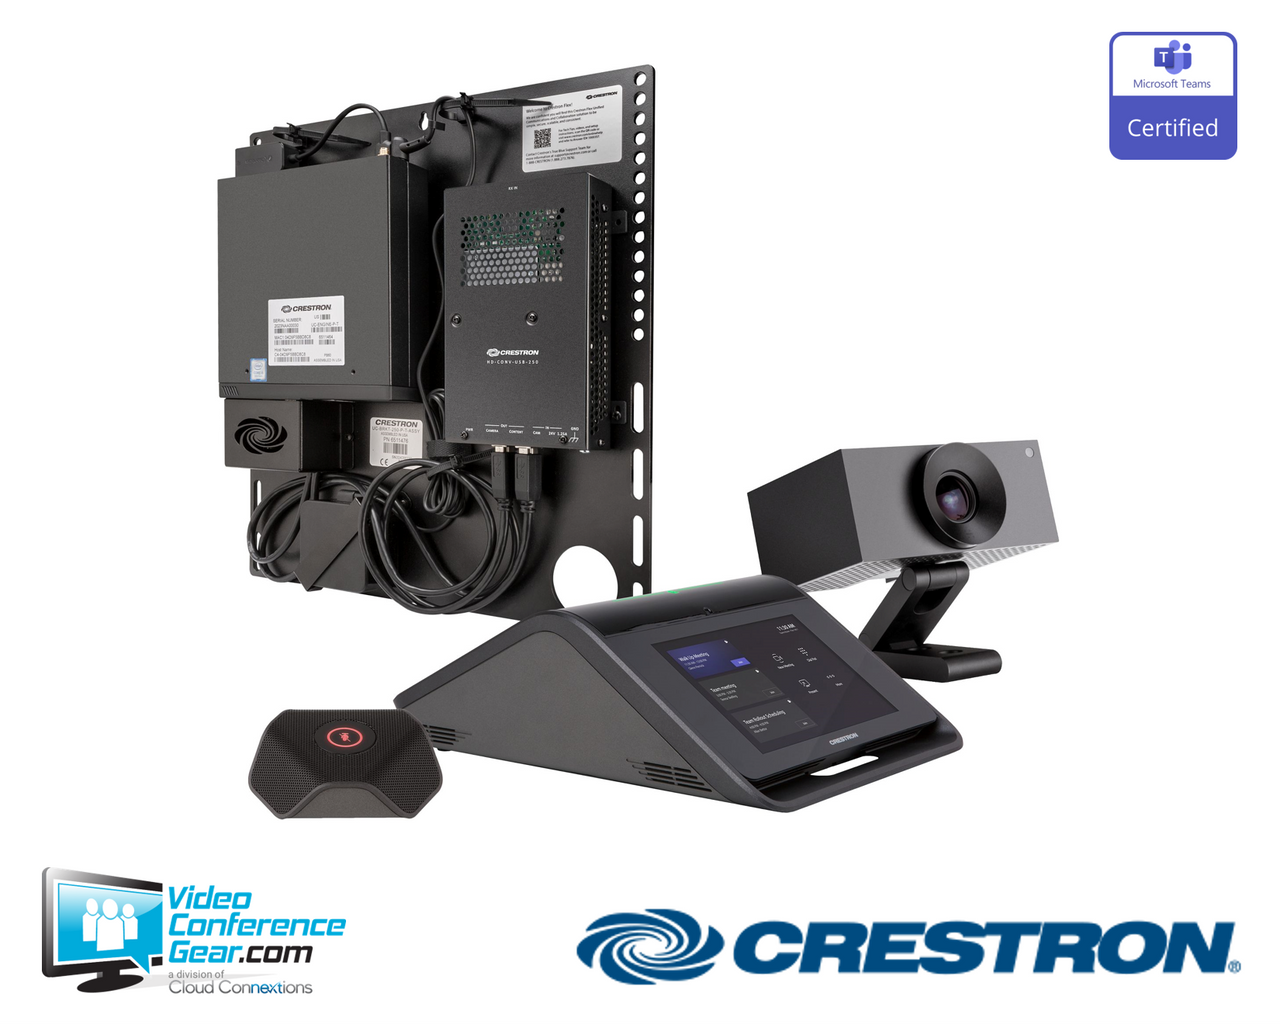 Crestron Flex Tabletop Large Room Video Conference System for Microsoft Teams® Rooms